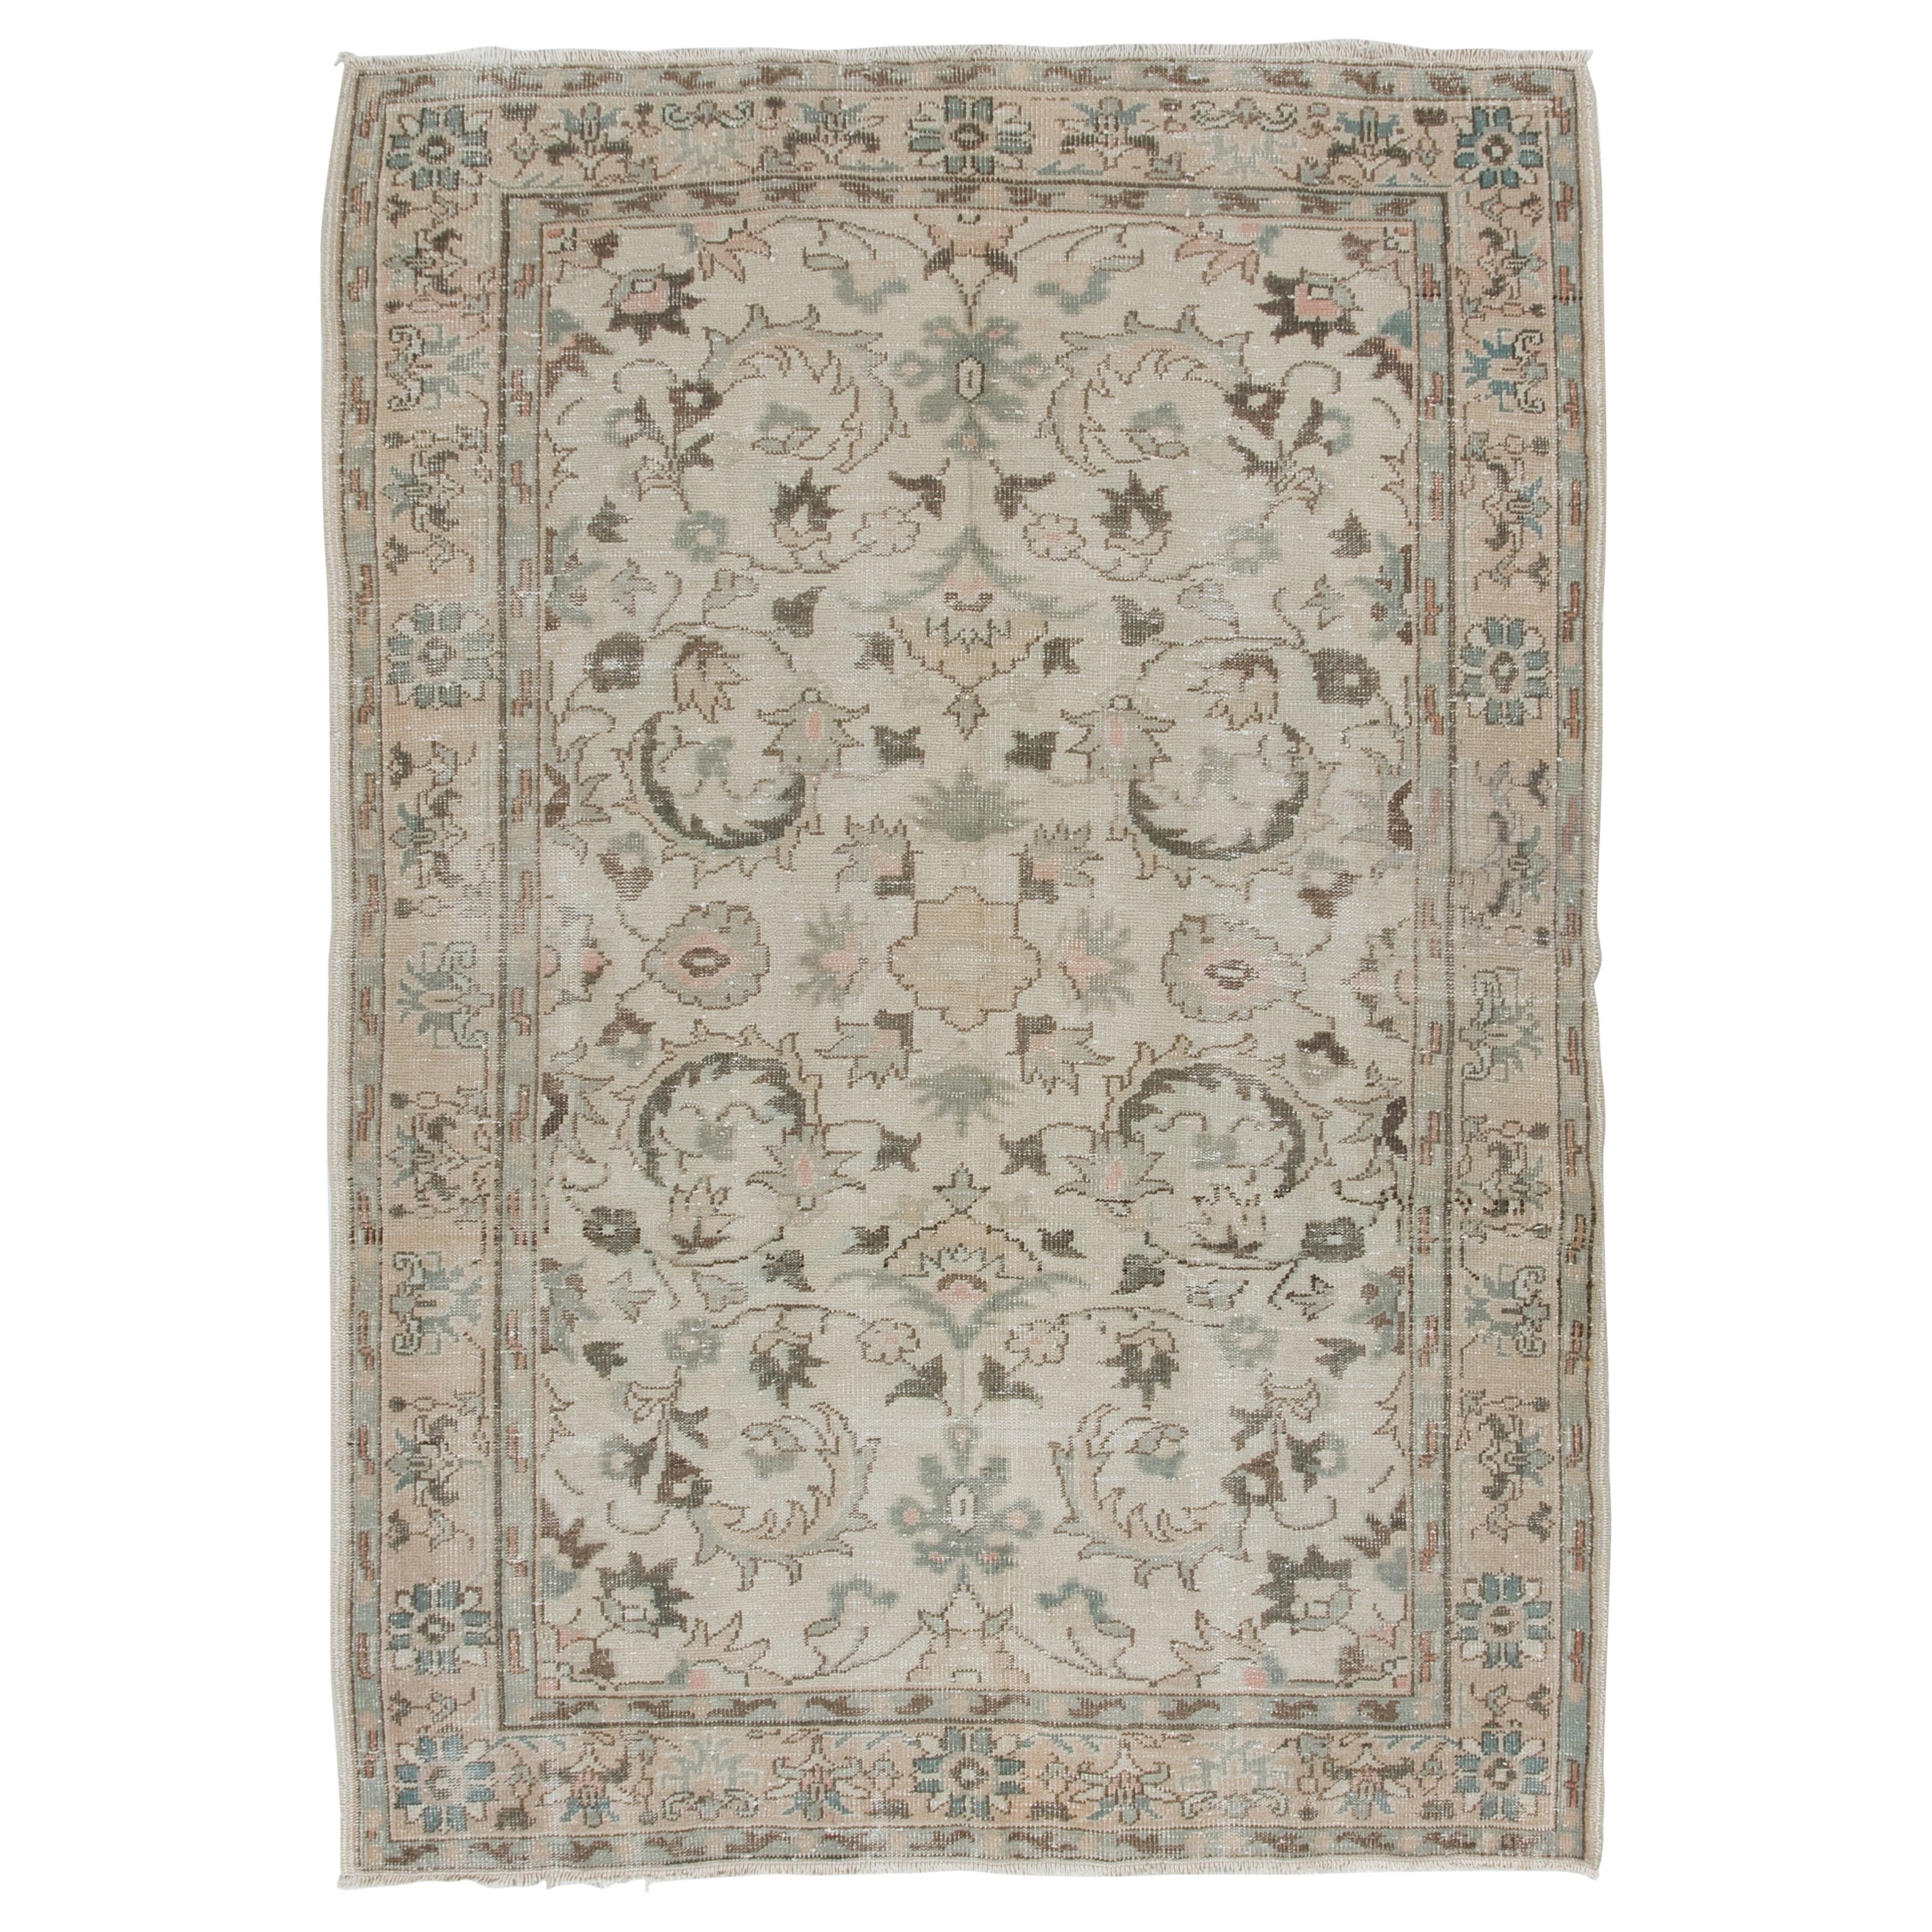 5.7x8 Ft Vintage Hand Knotted Anatolian Area Rug, Floral Design Floor Covering For Sale